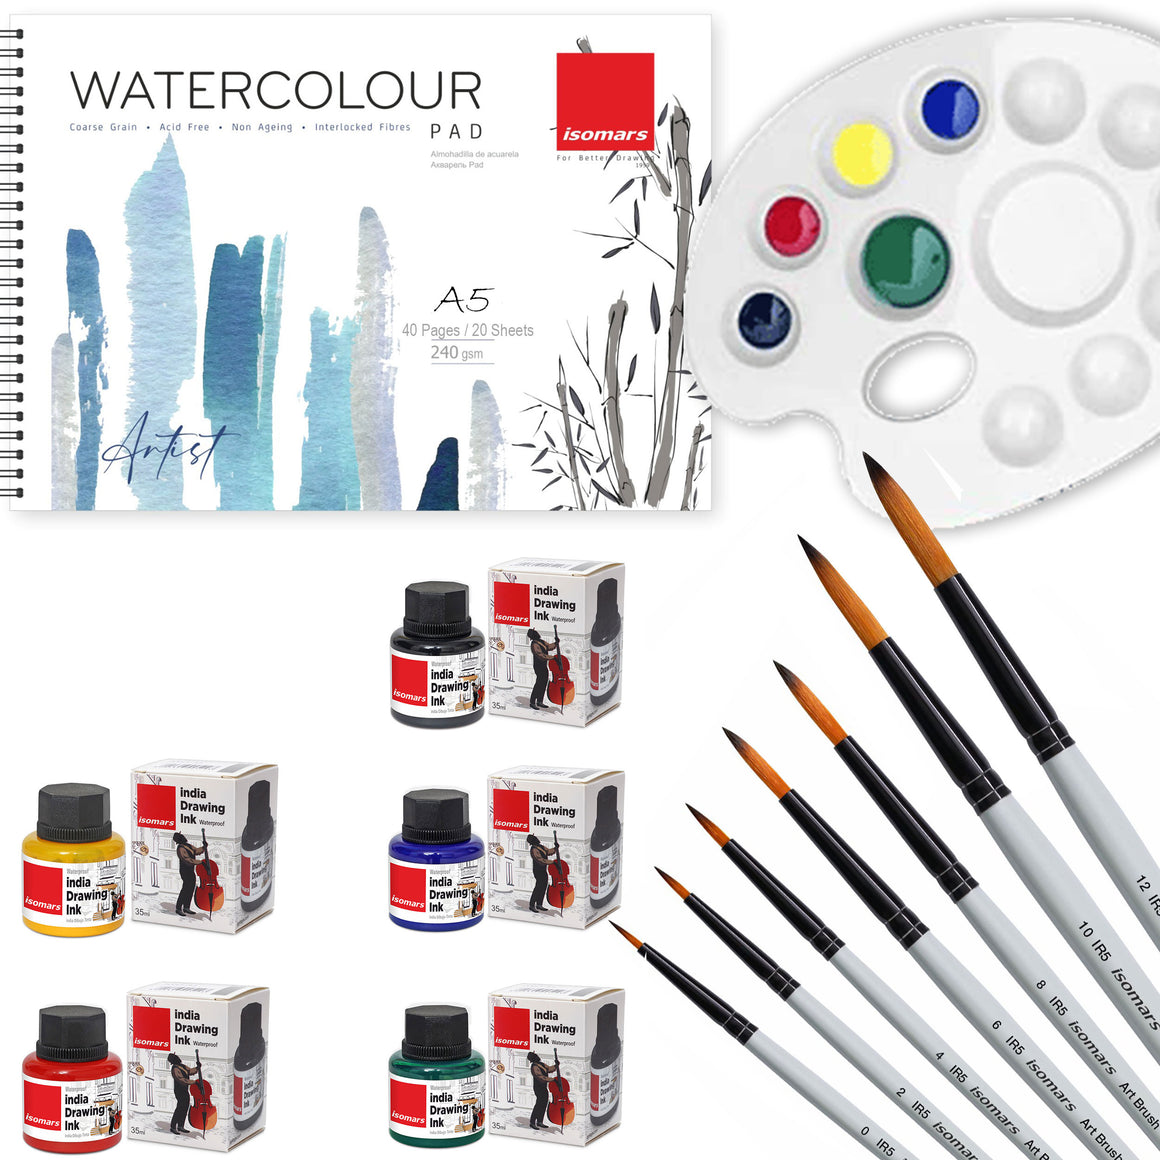 Drawing Set: Watercolor Pad, Colour Palette, Brush Set, and Ink Collection